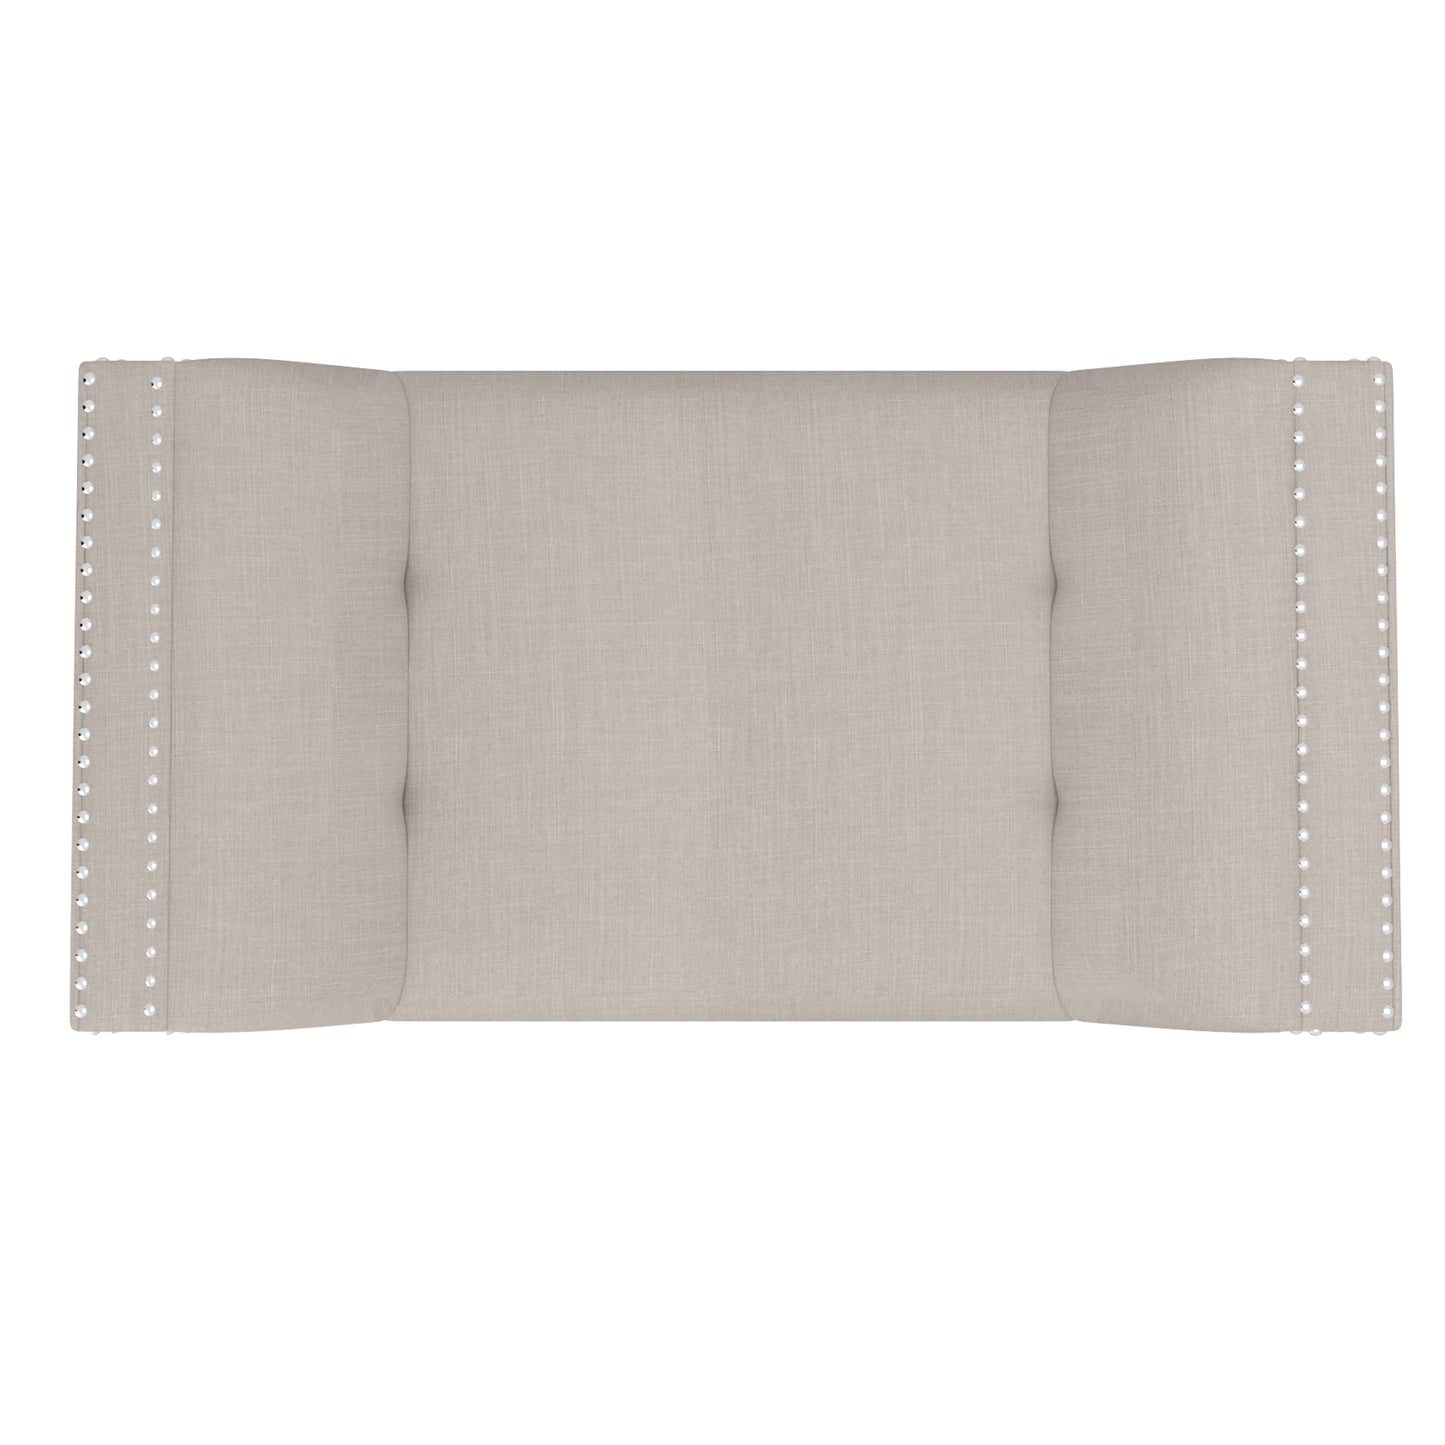 (LANA BEIGE)- FABRIC BENCH- OUT OF STOCK UNTIL SEPTEMBER 30, 2023